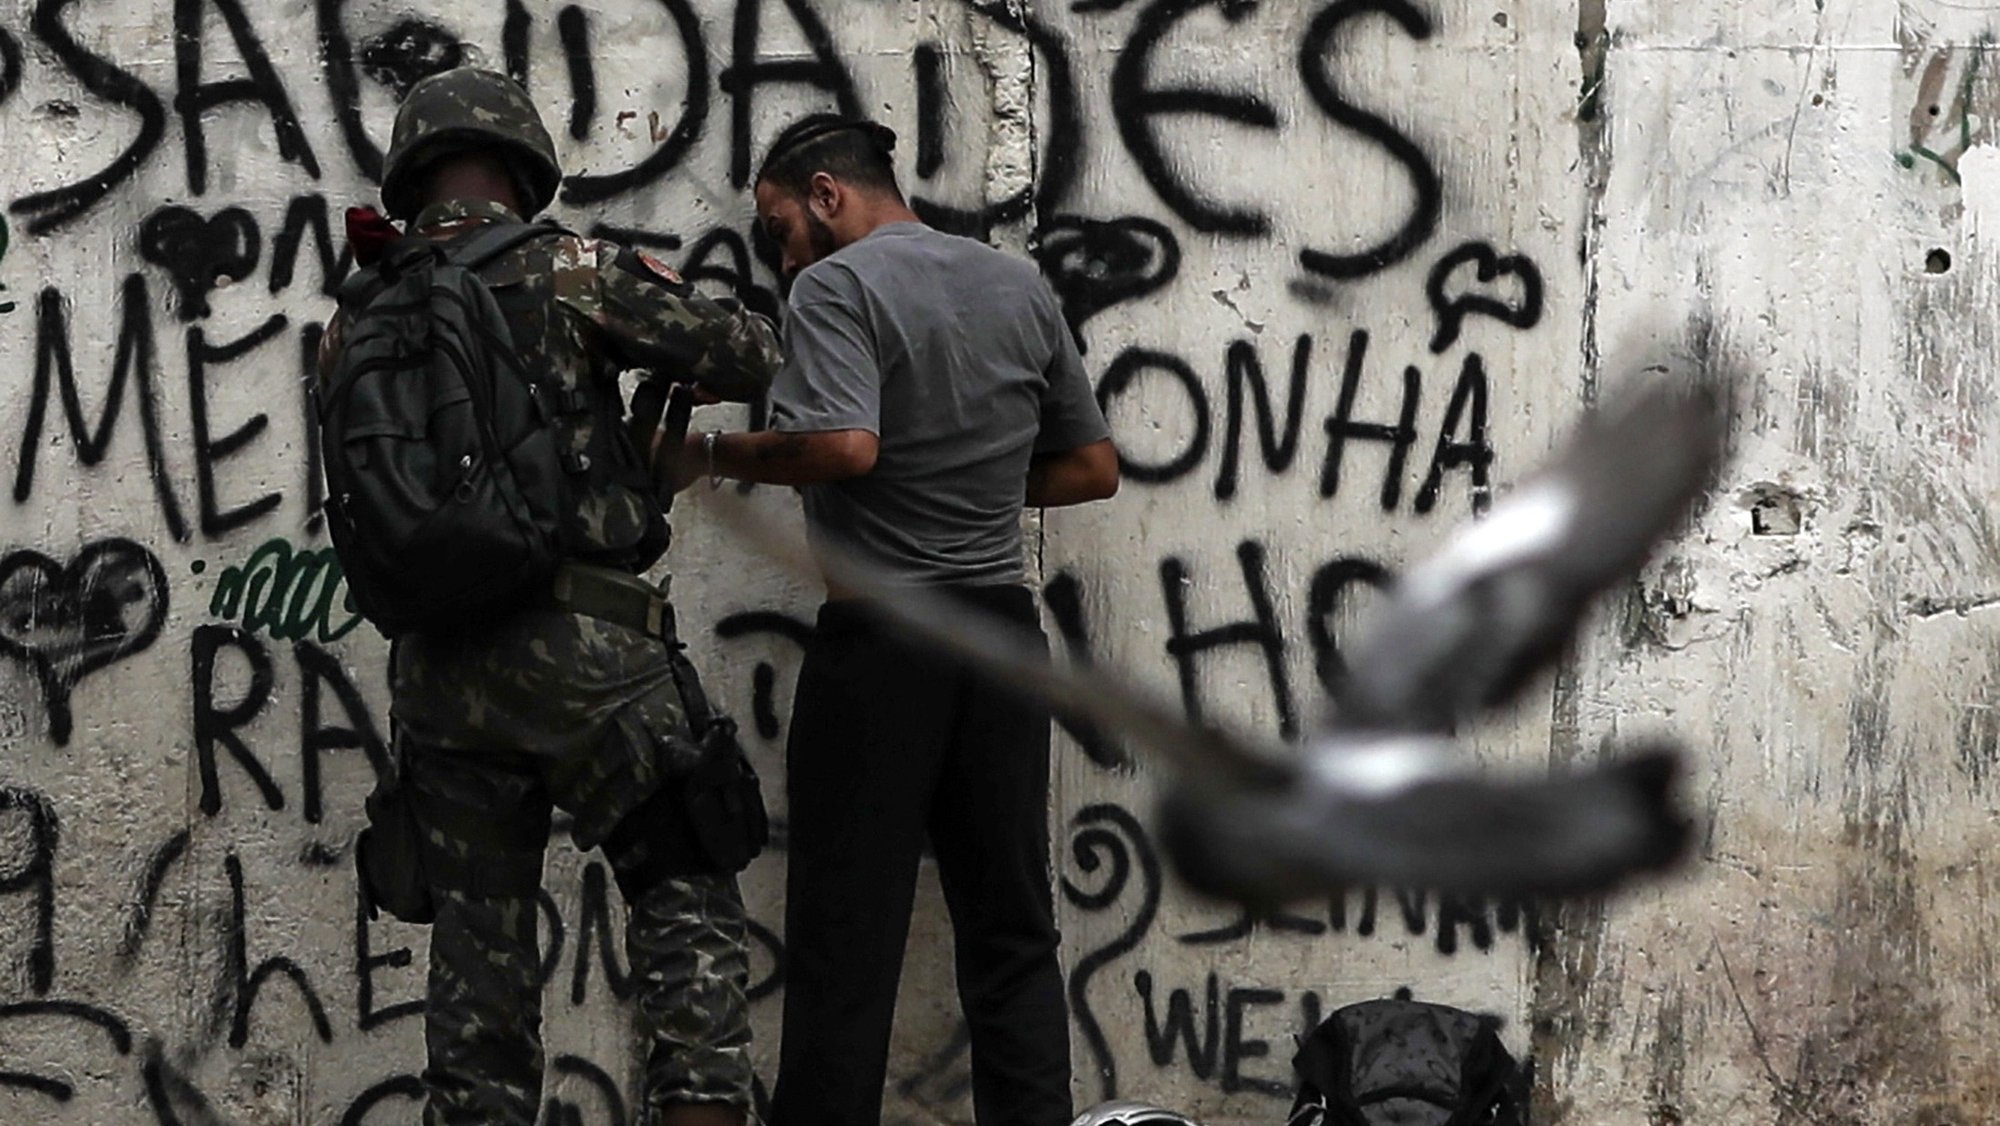 epa07035265 aA local man is searched as armed military soldiers patrol in a neighbohood in Rio de Janeiro, Brazil, 20 September 2018. Nearly 450 members of the Armed Forces participate in an operation against drug trafficking at the Jacarezinho slum in Rio de Janeiro.  EPA/ANTONIO LACERDA